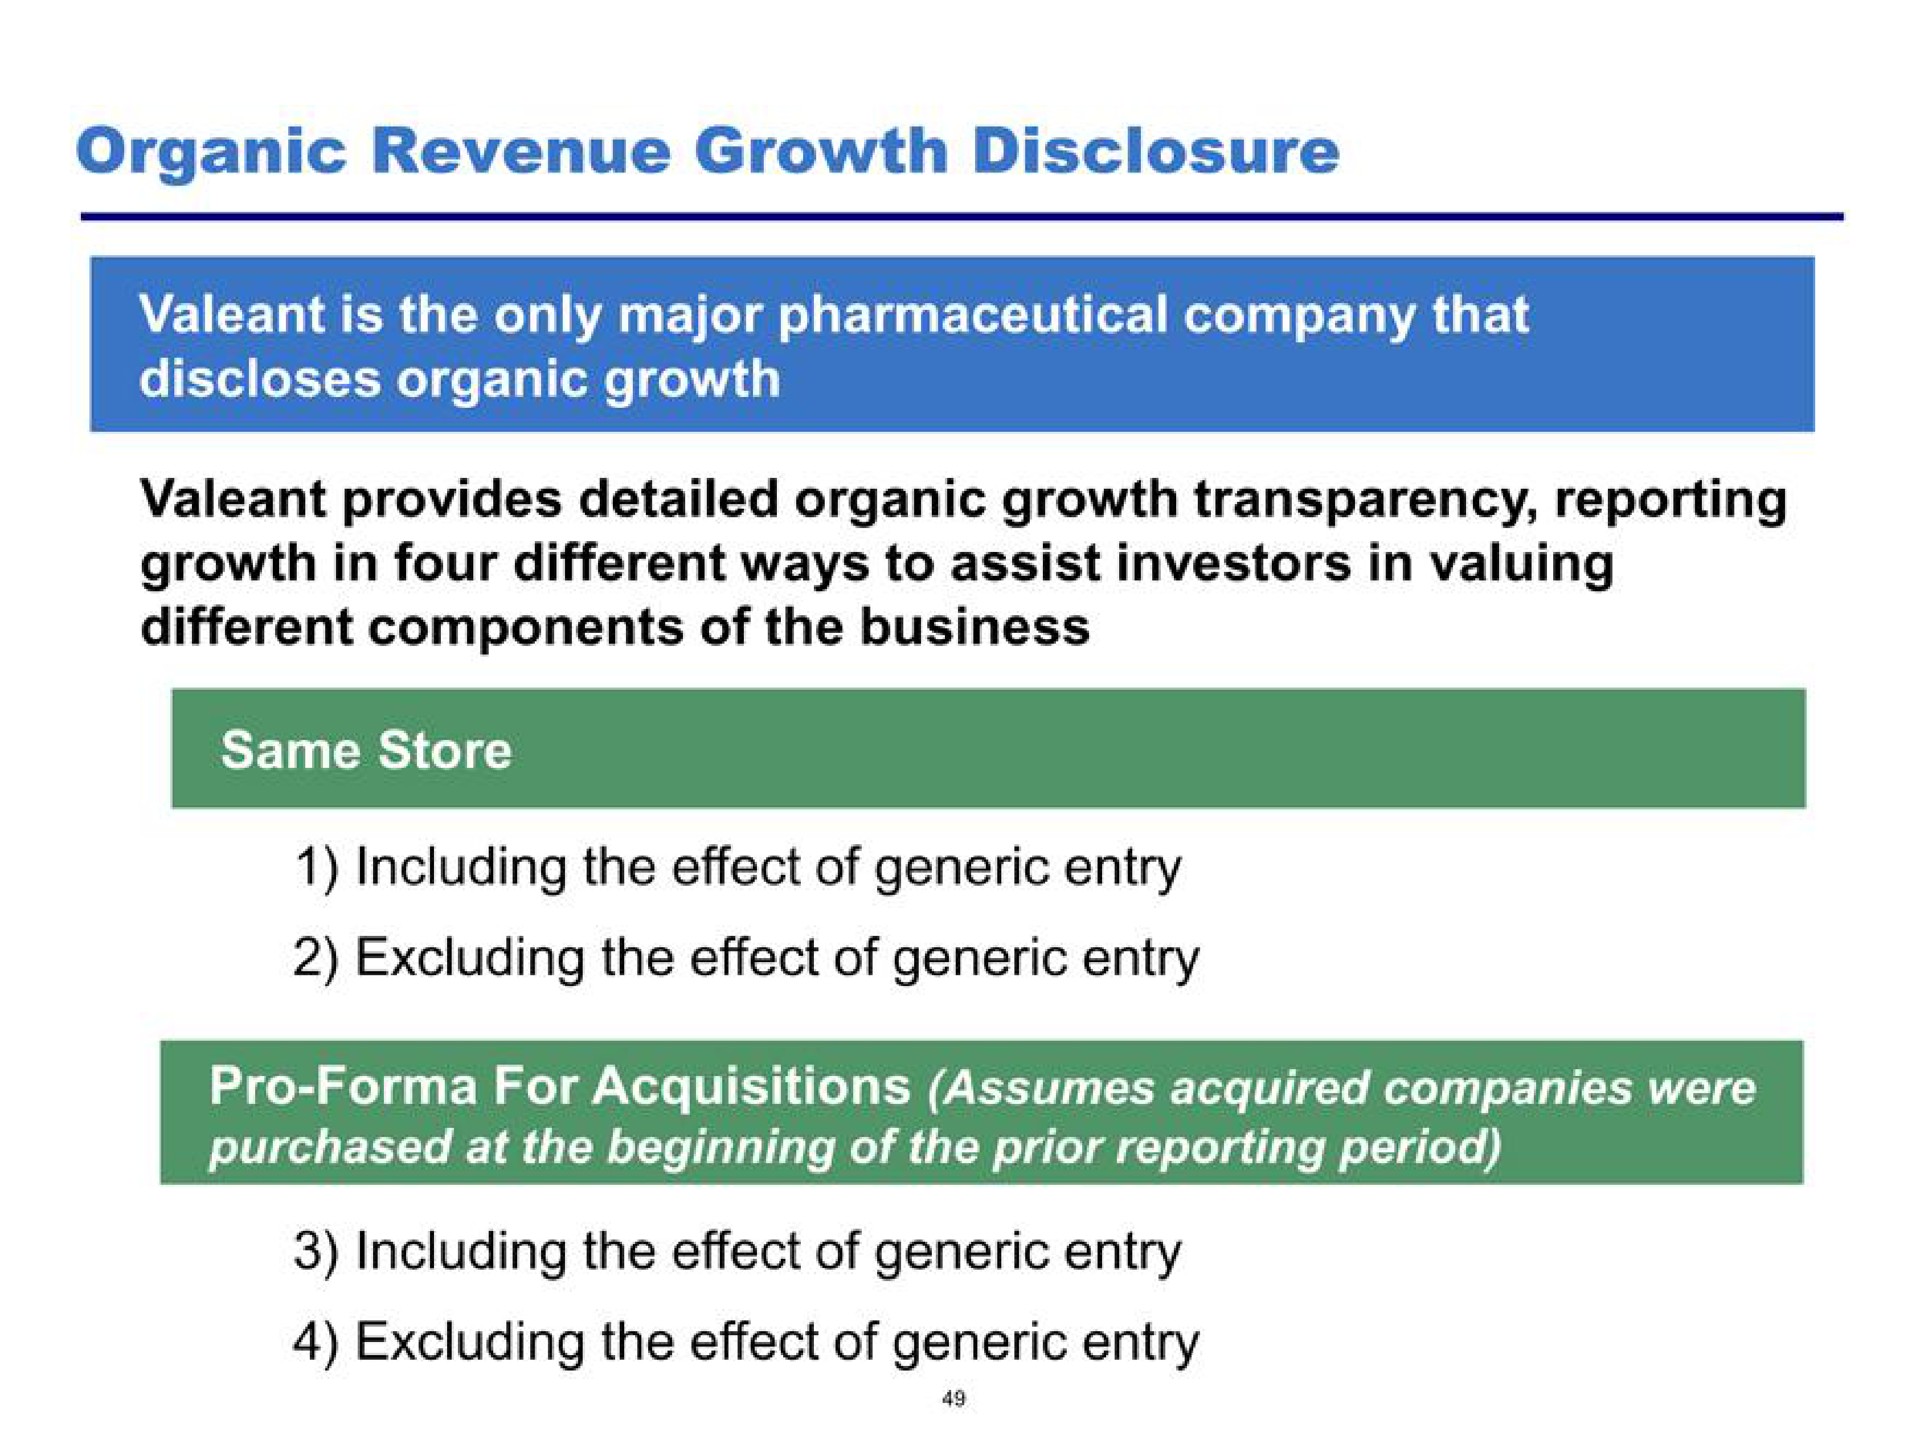 organic revenue growth disclosure excluding the effect of generic entry | Pershing Square